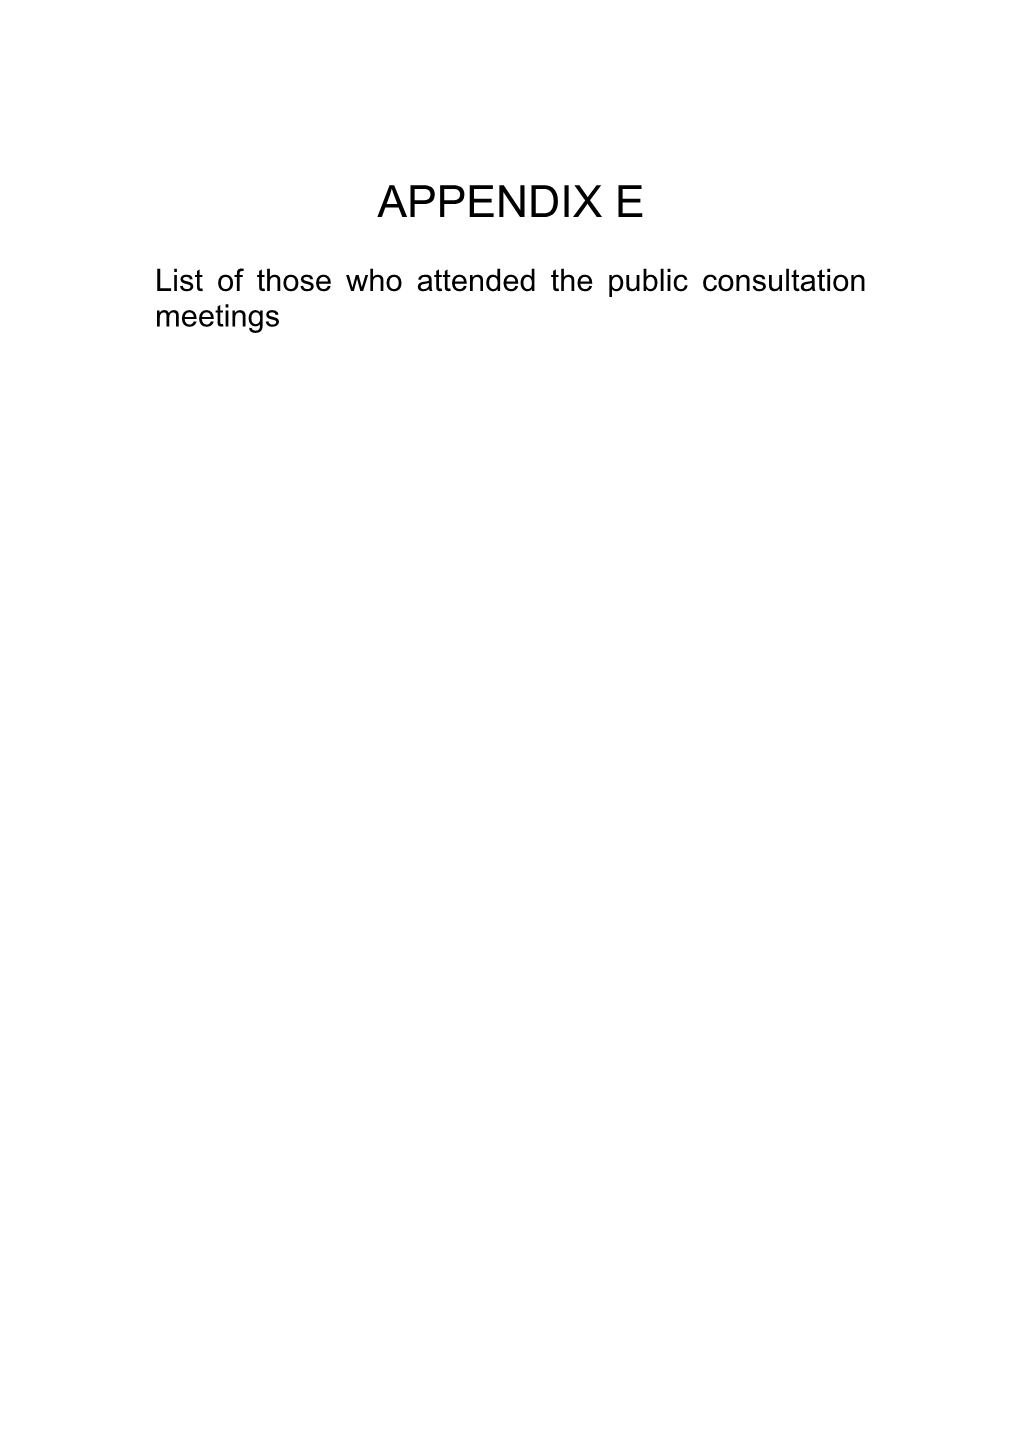 List of Those Who Attended the Public Consultation Meetings